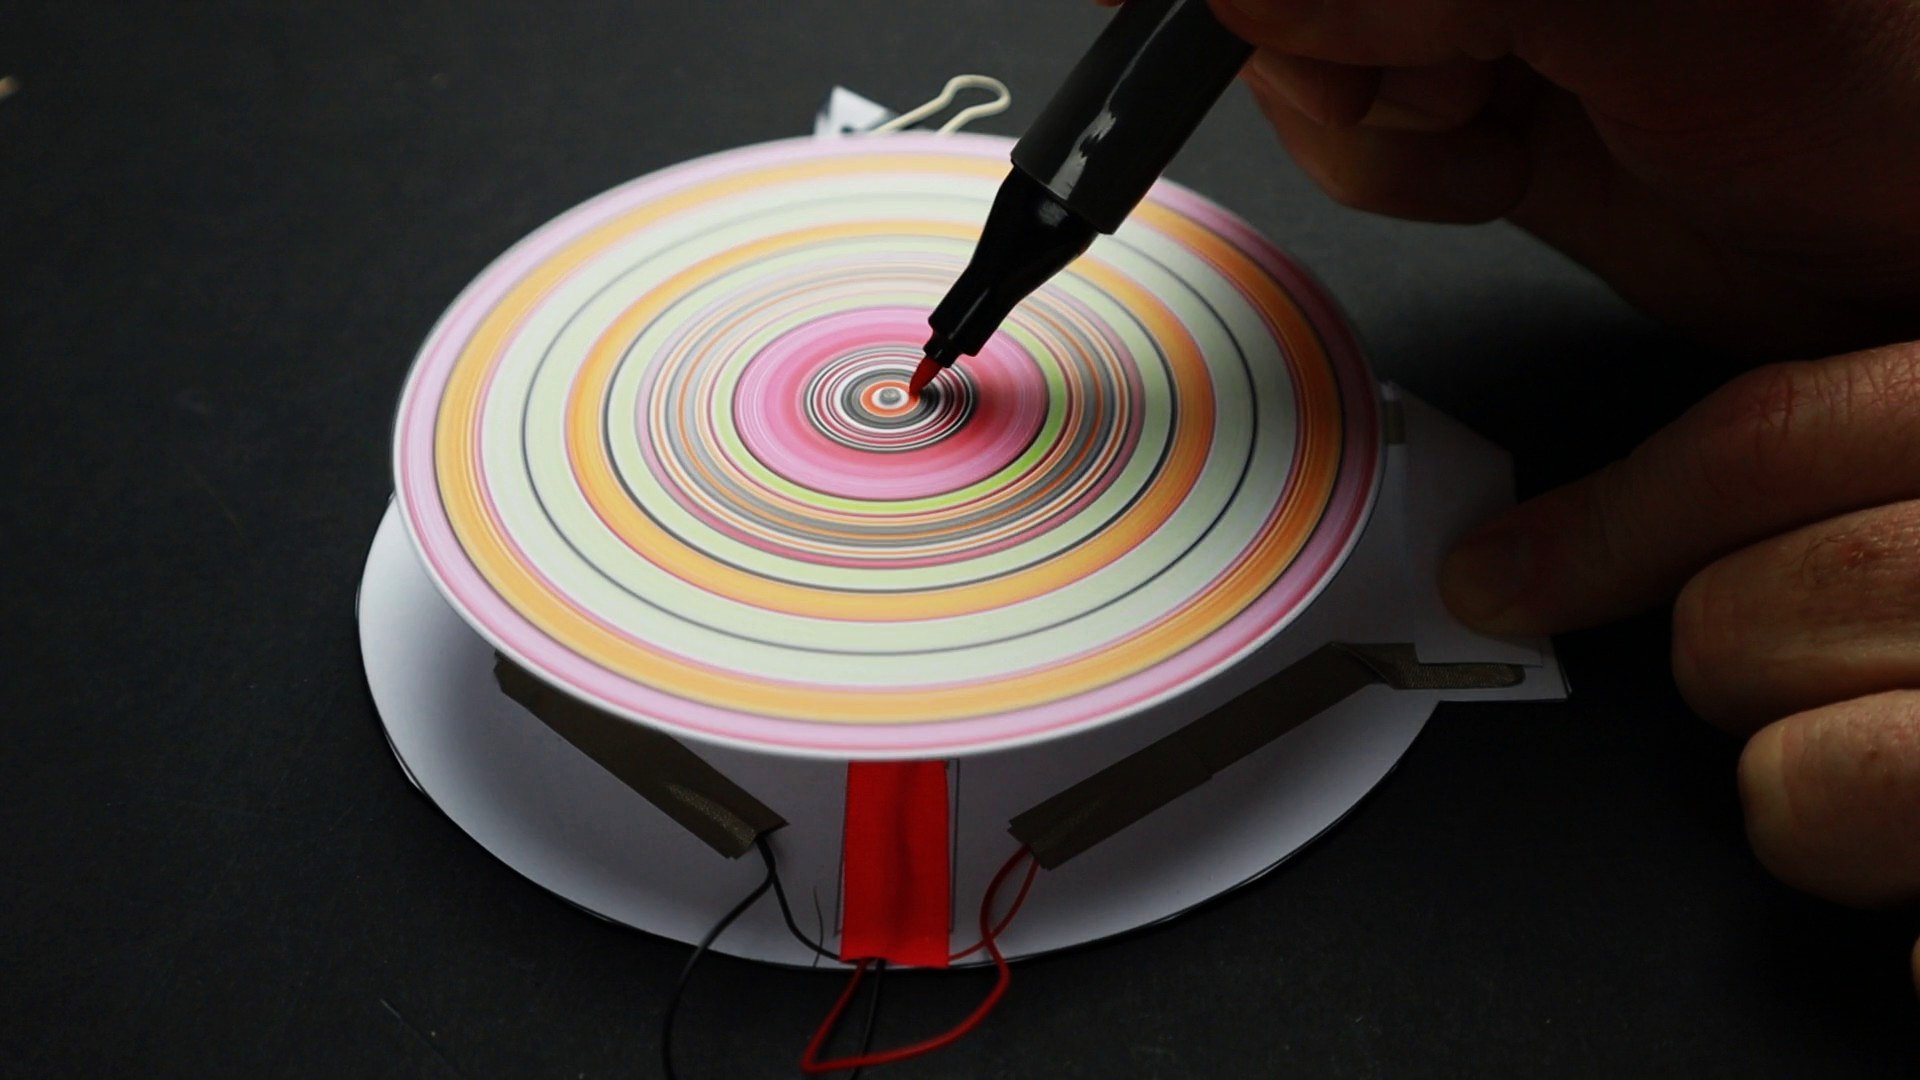 Incredible multi color spin art painting - with green, red and yellow